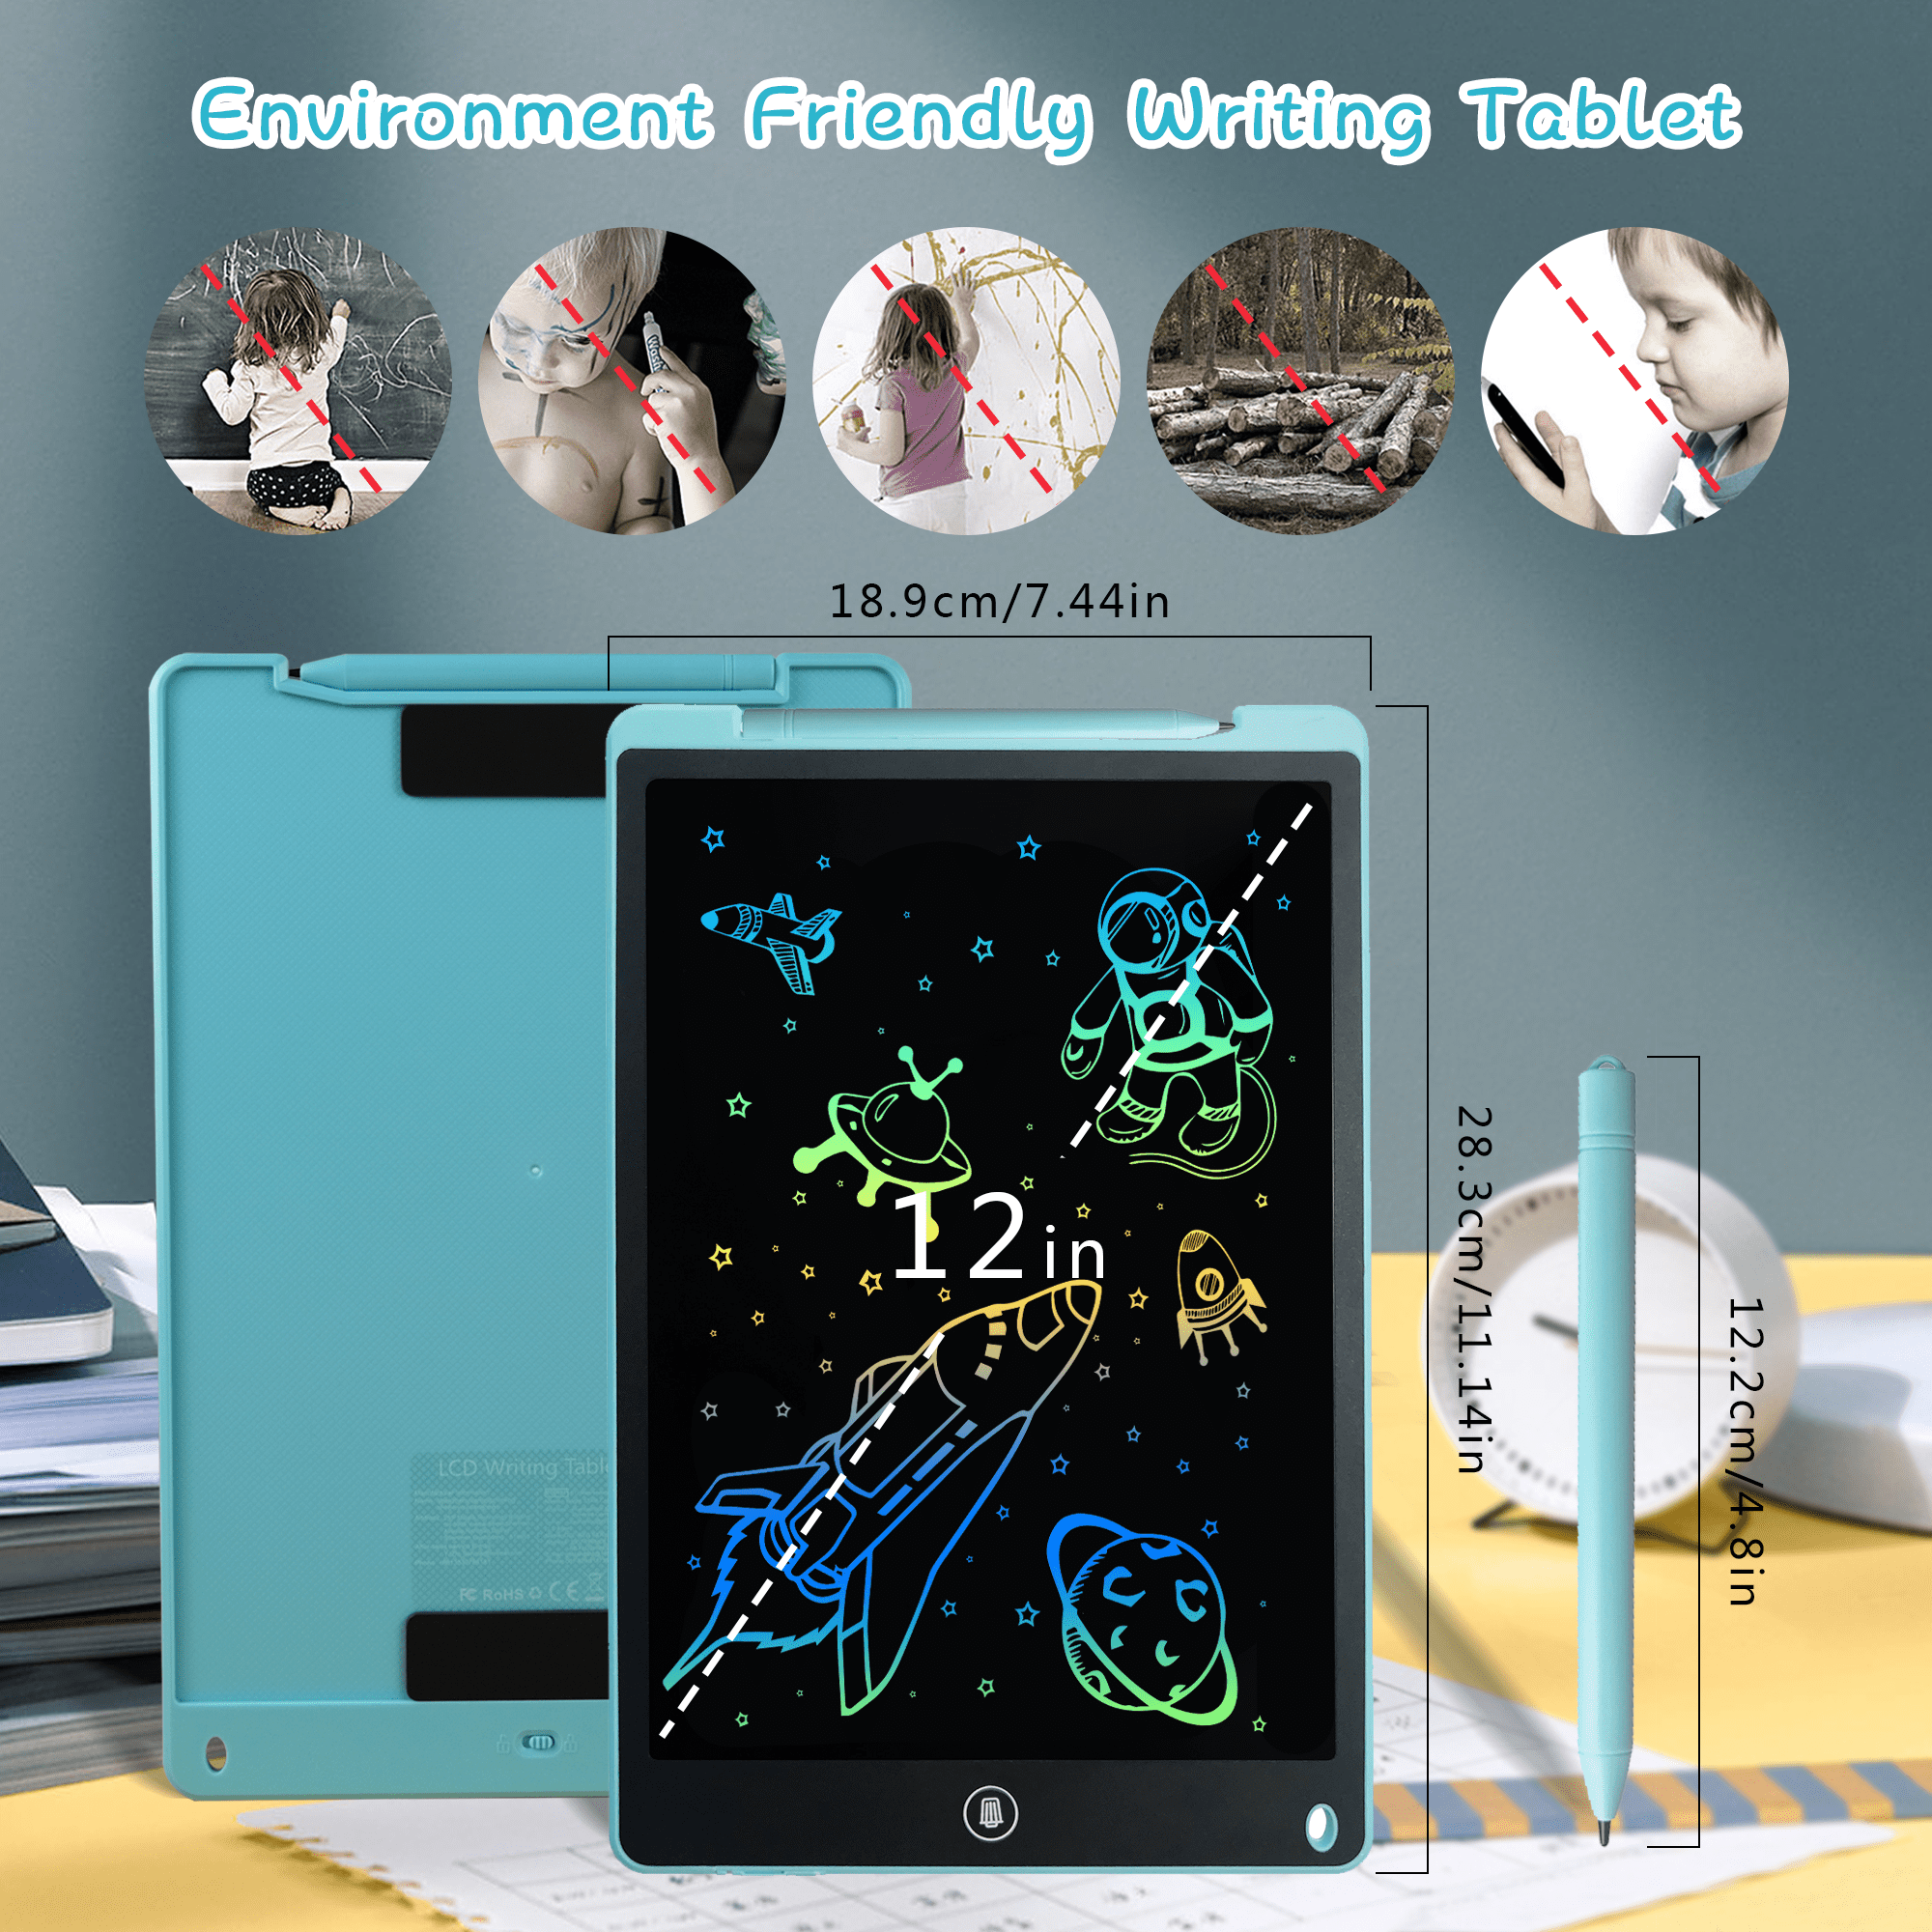 Adofi LCD Writing Tablet, 10-Inch Doodle Board Kids Electronics Tablet Drawing Board Child Graphic Tablet for Kids Writing and Drawing at Home, School